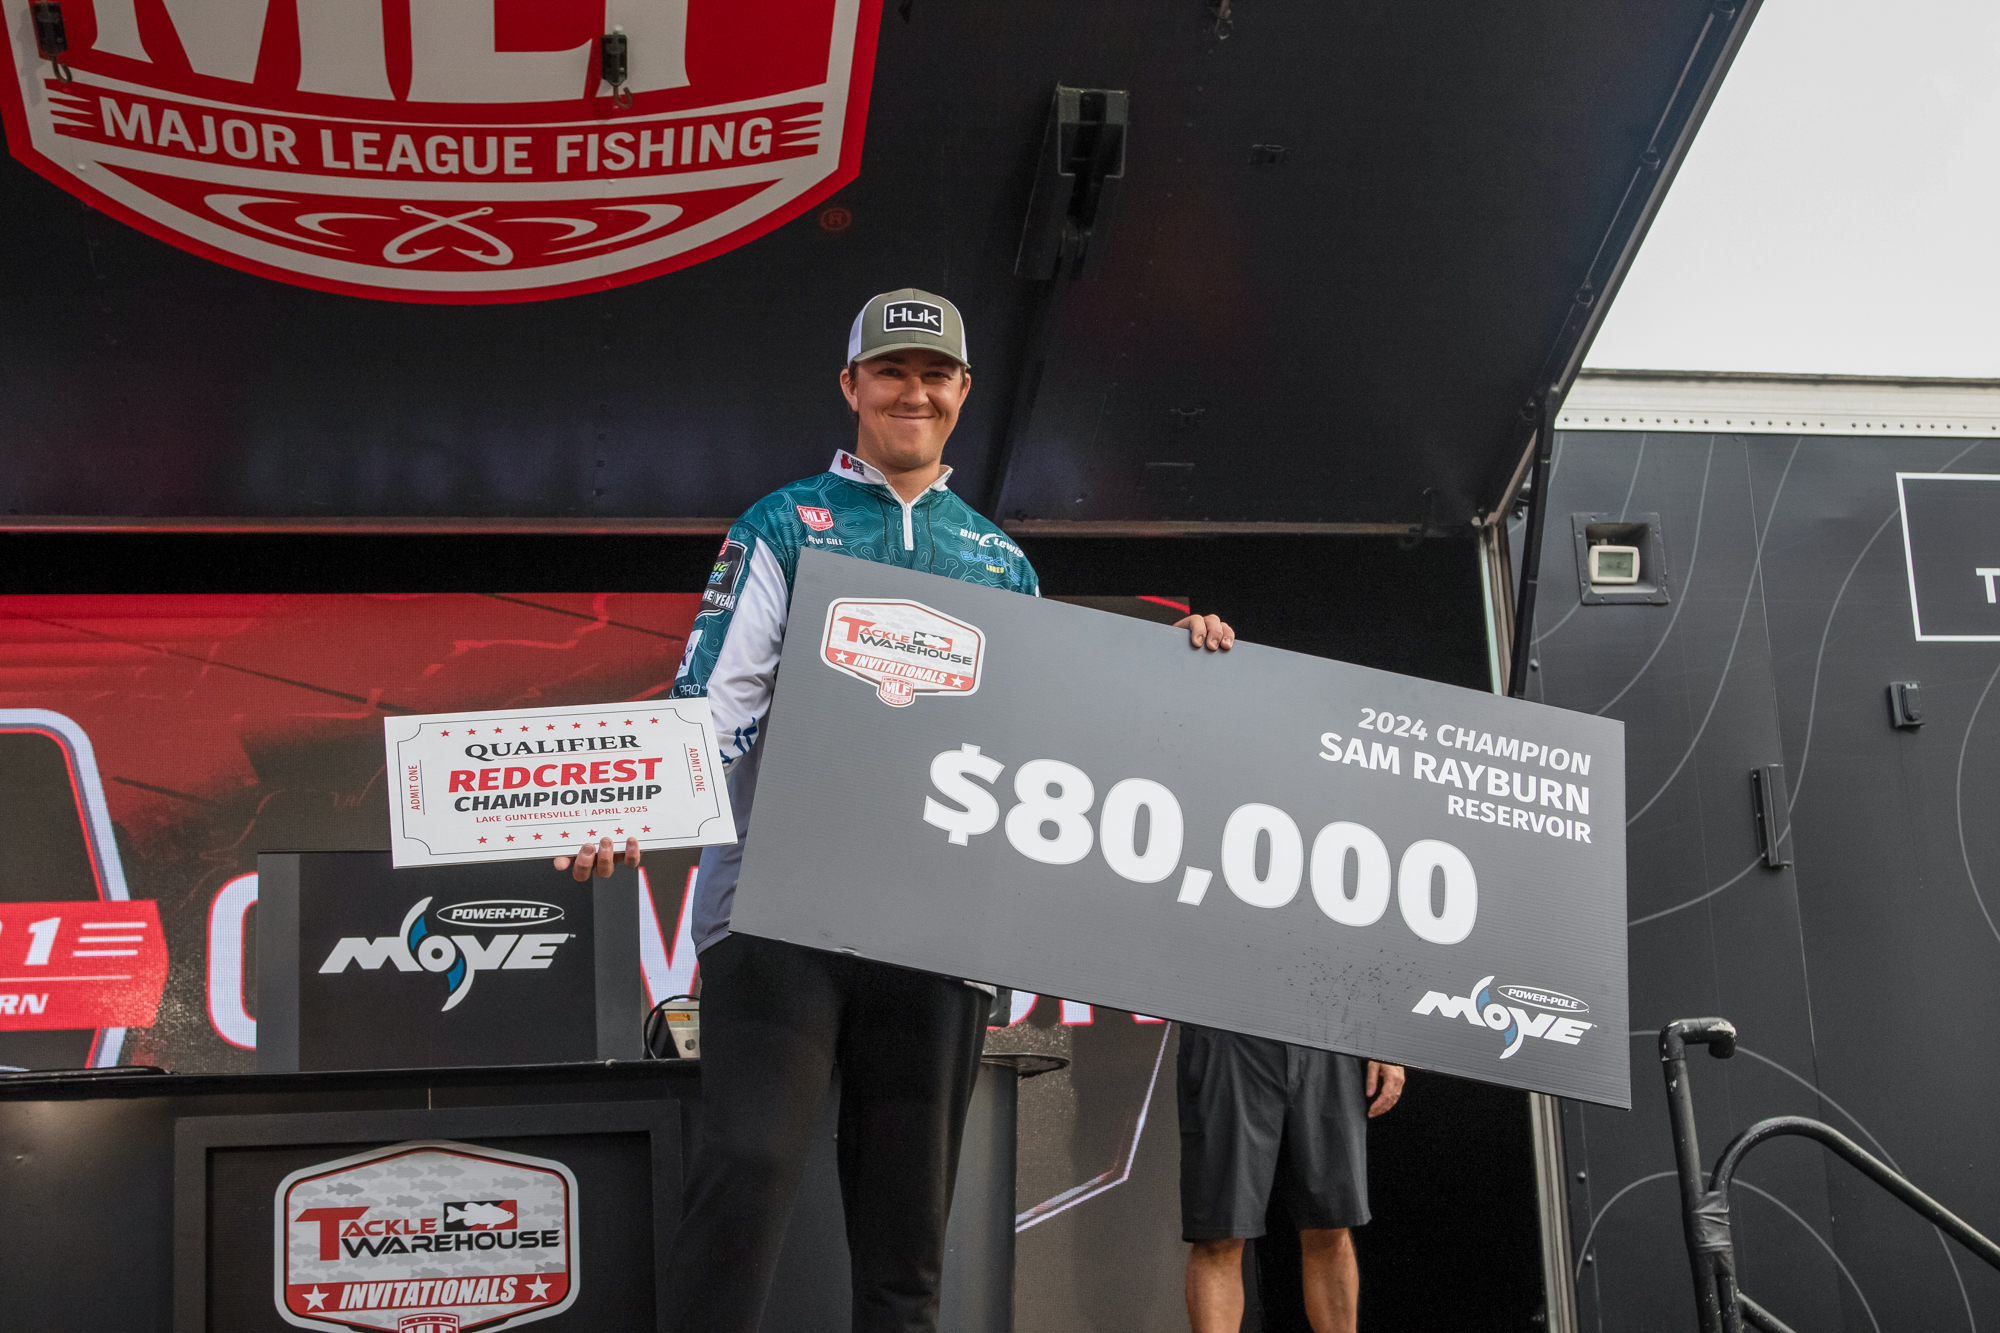 Drew Gill wins Tackle Warehouse Invitationals Stop 1 Presented by